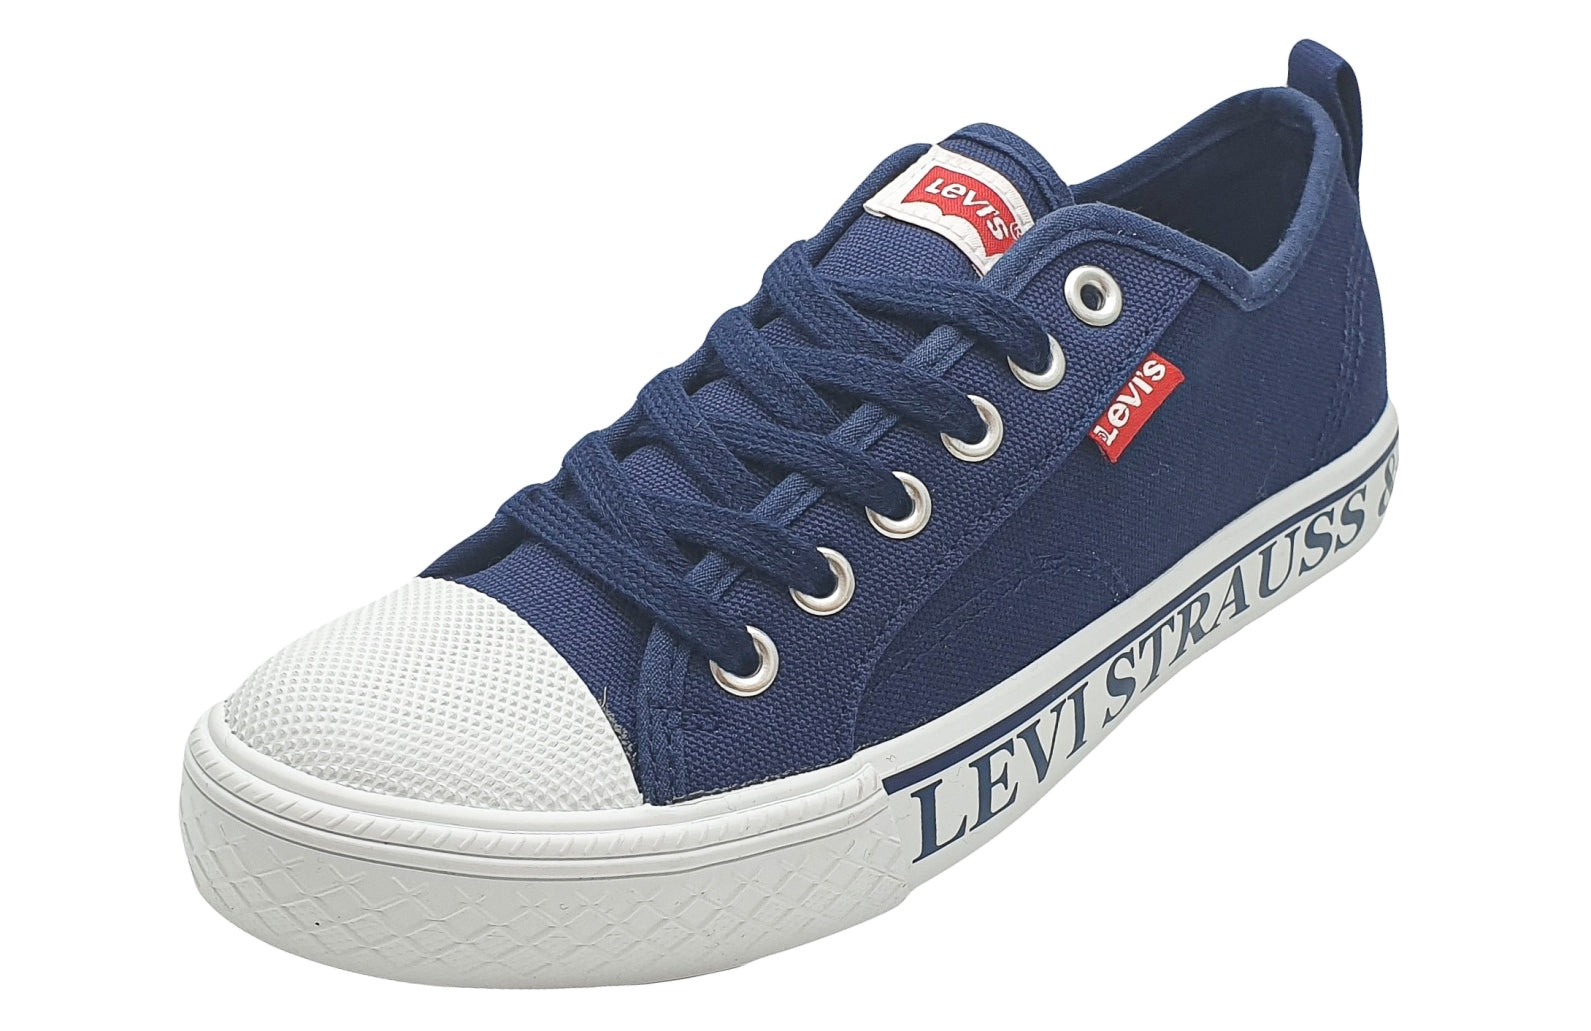 Levis Kids Trainers, Maui Strauss in Navy Blue – KIDSWAY